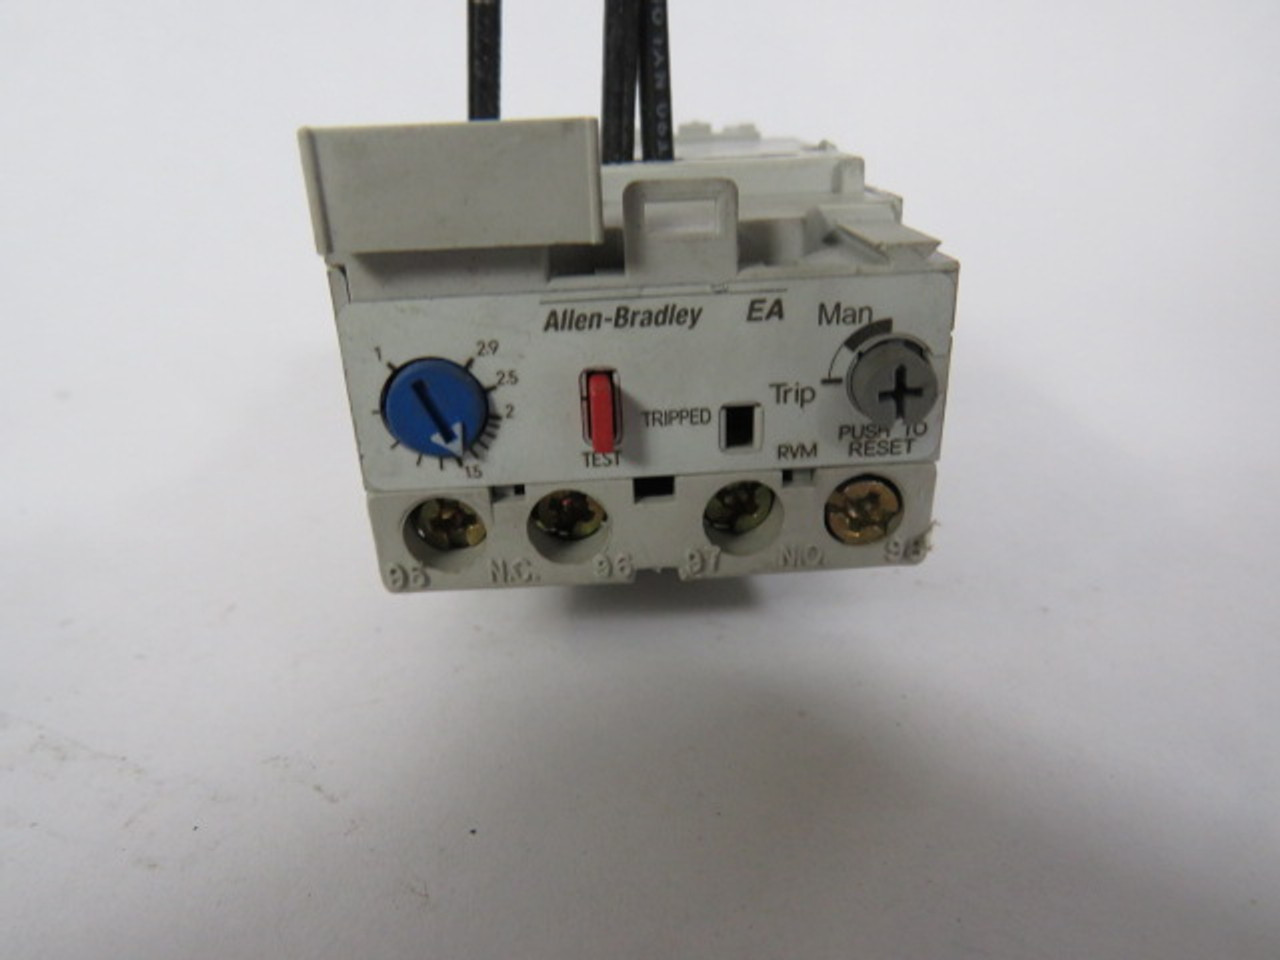 Allen-Bradley 193-EA1DB Series B Overload Relay 1.0-2.9A MISSING CLIP USED